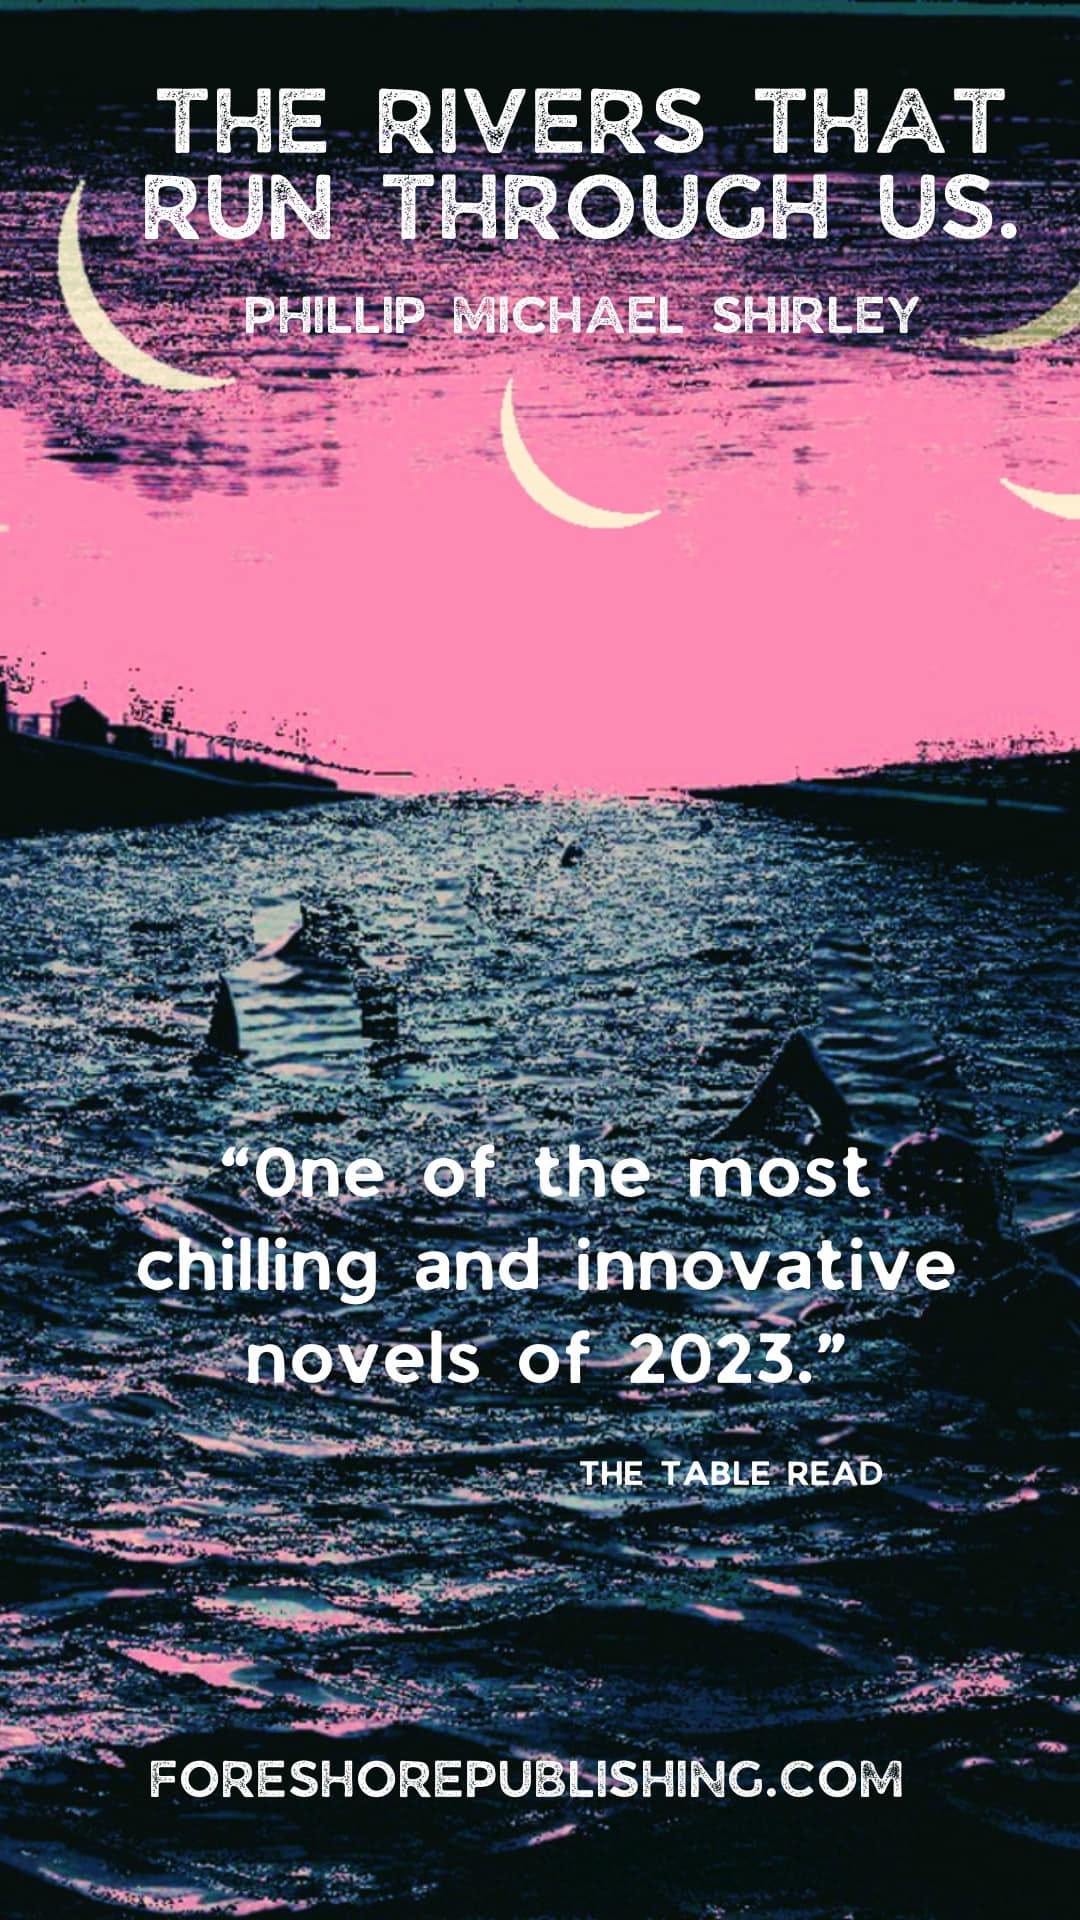 May be a graphic of text that says 'THE RIVERS THAT RUN THROUGH US. PHILLIP MICHAEL SHIRLEY One of the most chilling and innovative novels of 2023." THE TABLE READ FORESHOREPUBLISHING.COM'